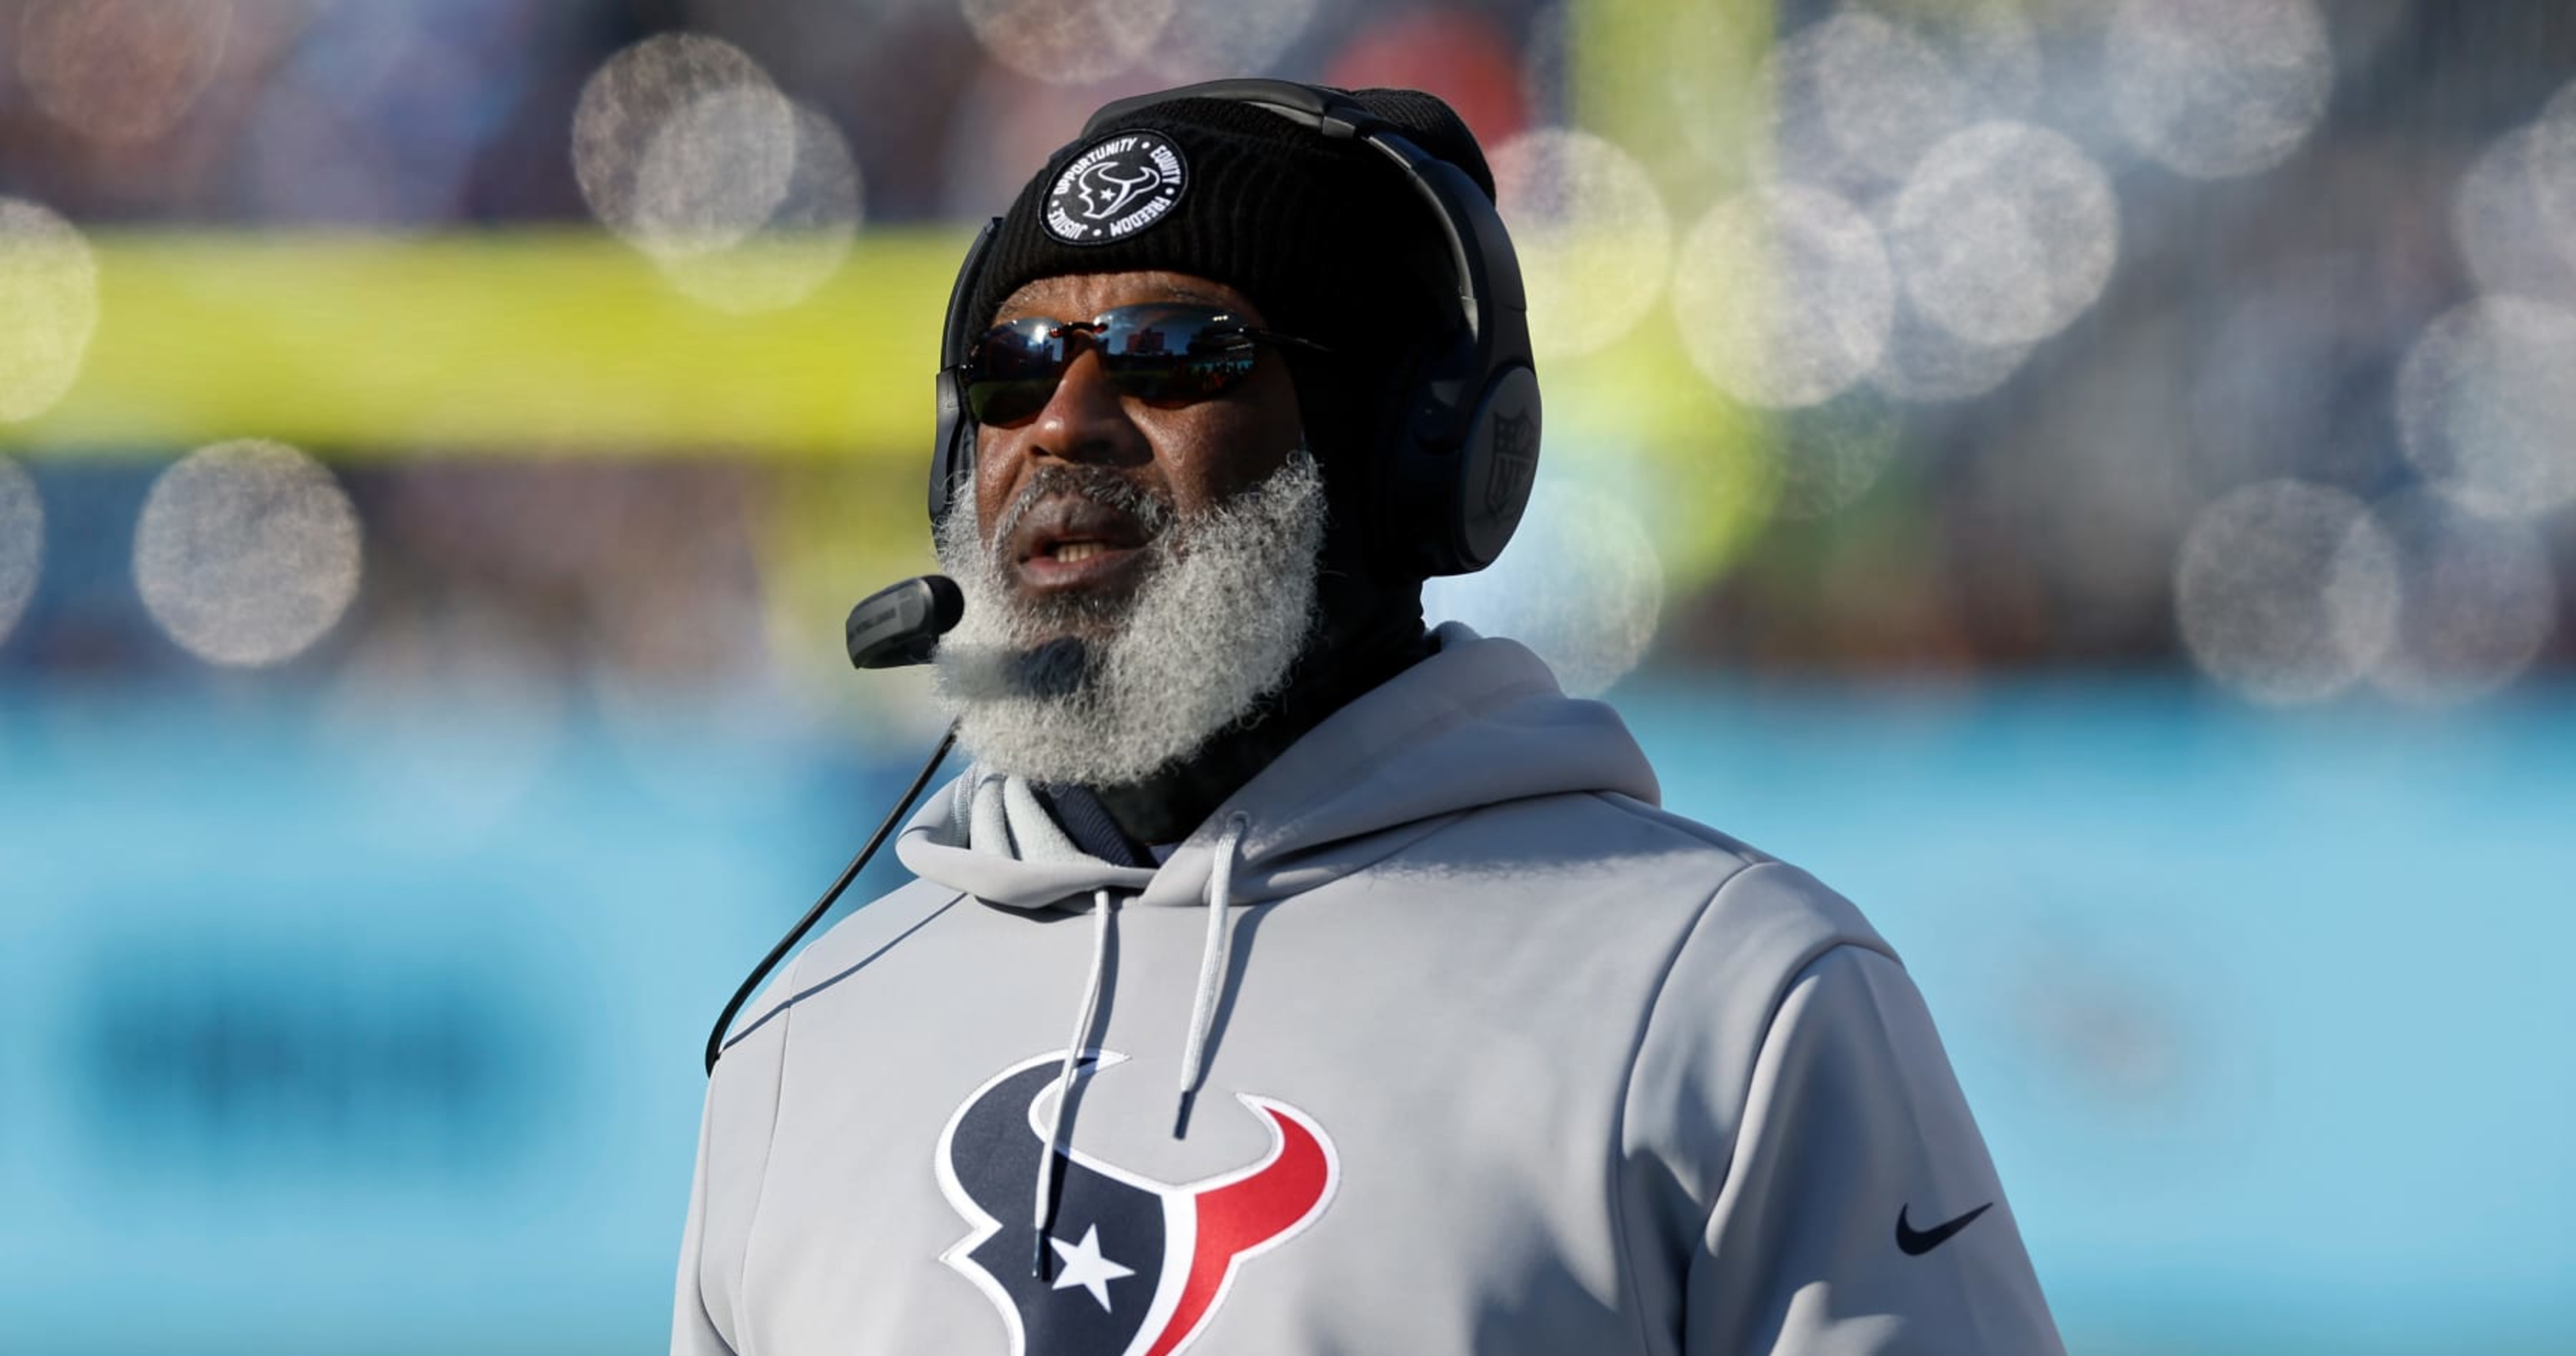 NFL Rumors: Lovie Smith 'Could Be Out' After 1 Season as Texans Head Coach